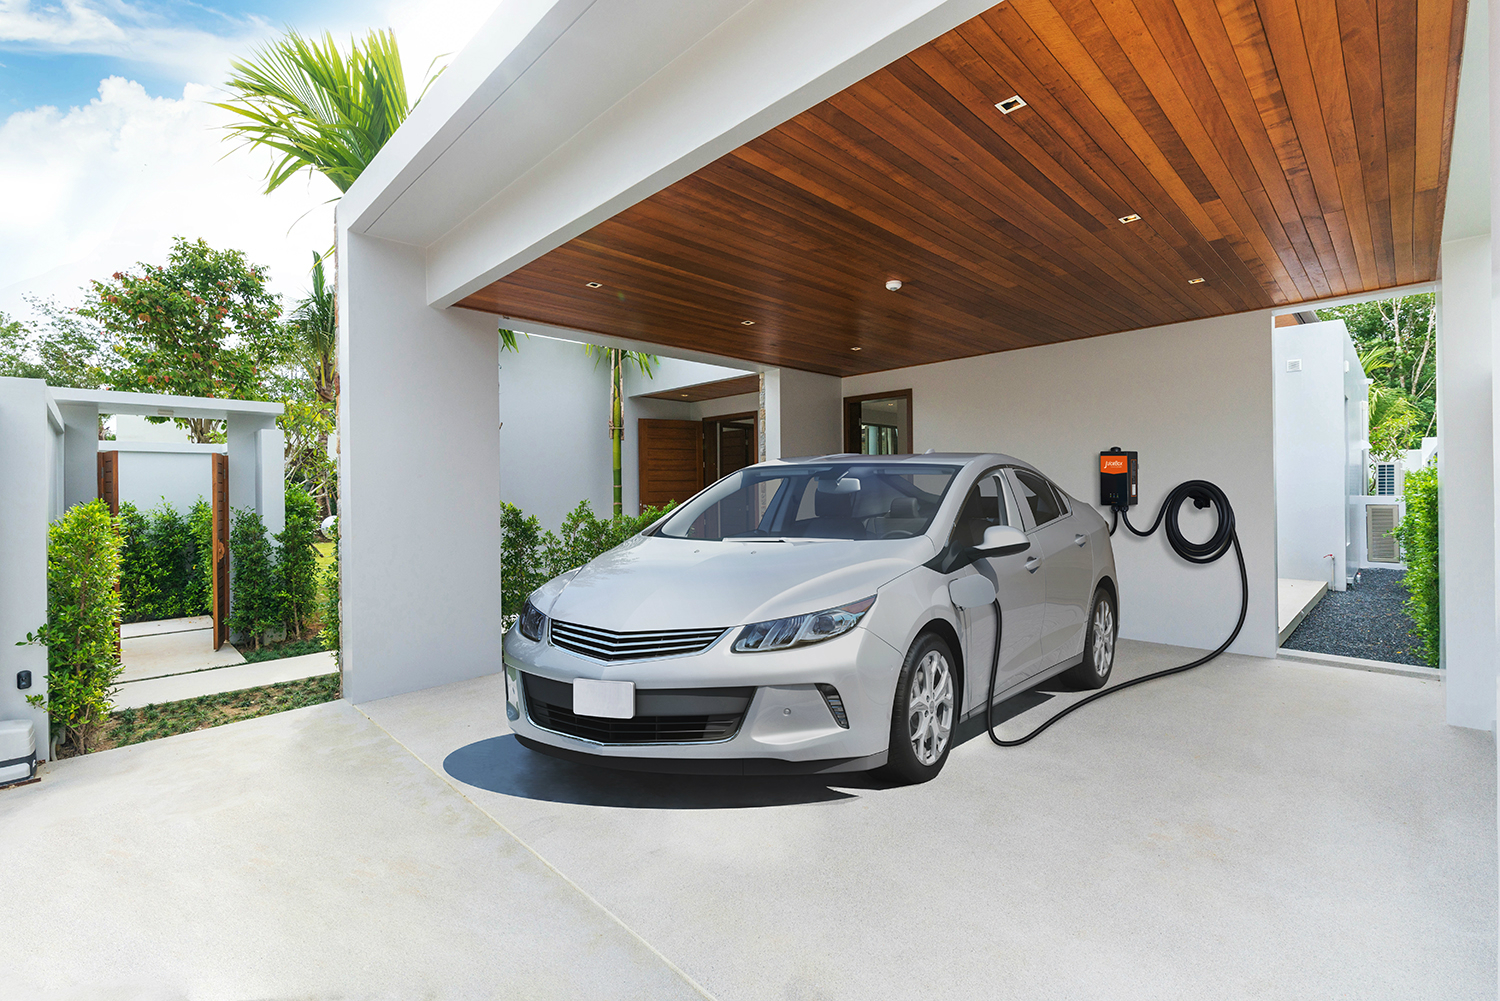 alexa and google compatible juiceplan simplifies ev charging at home juicebox pro 40 residential station wall mounted